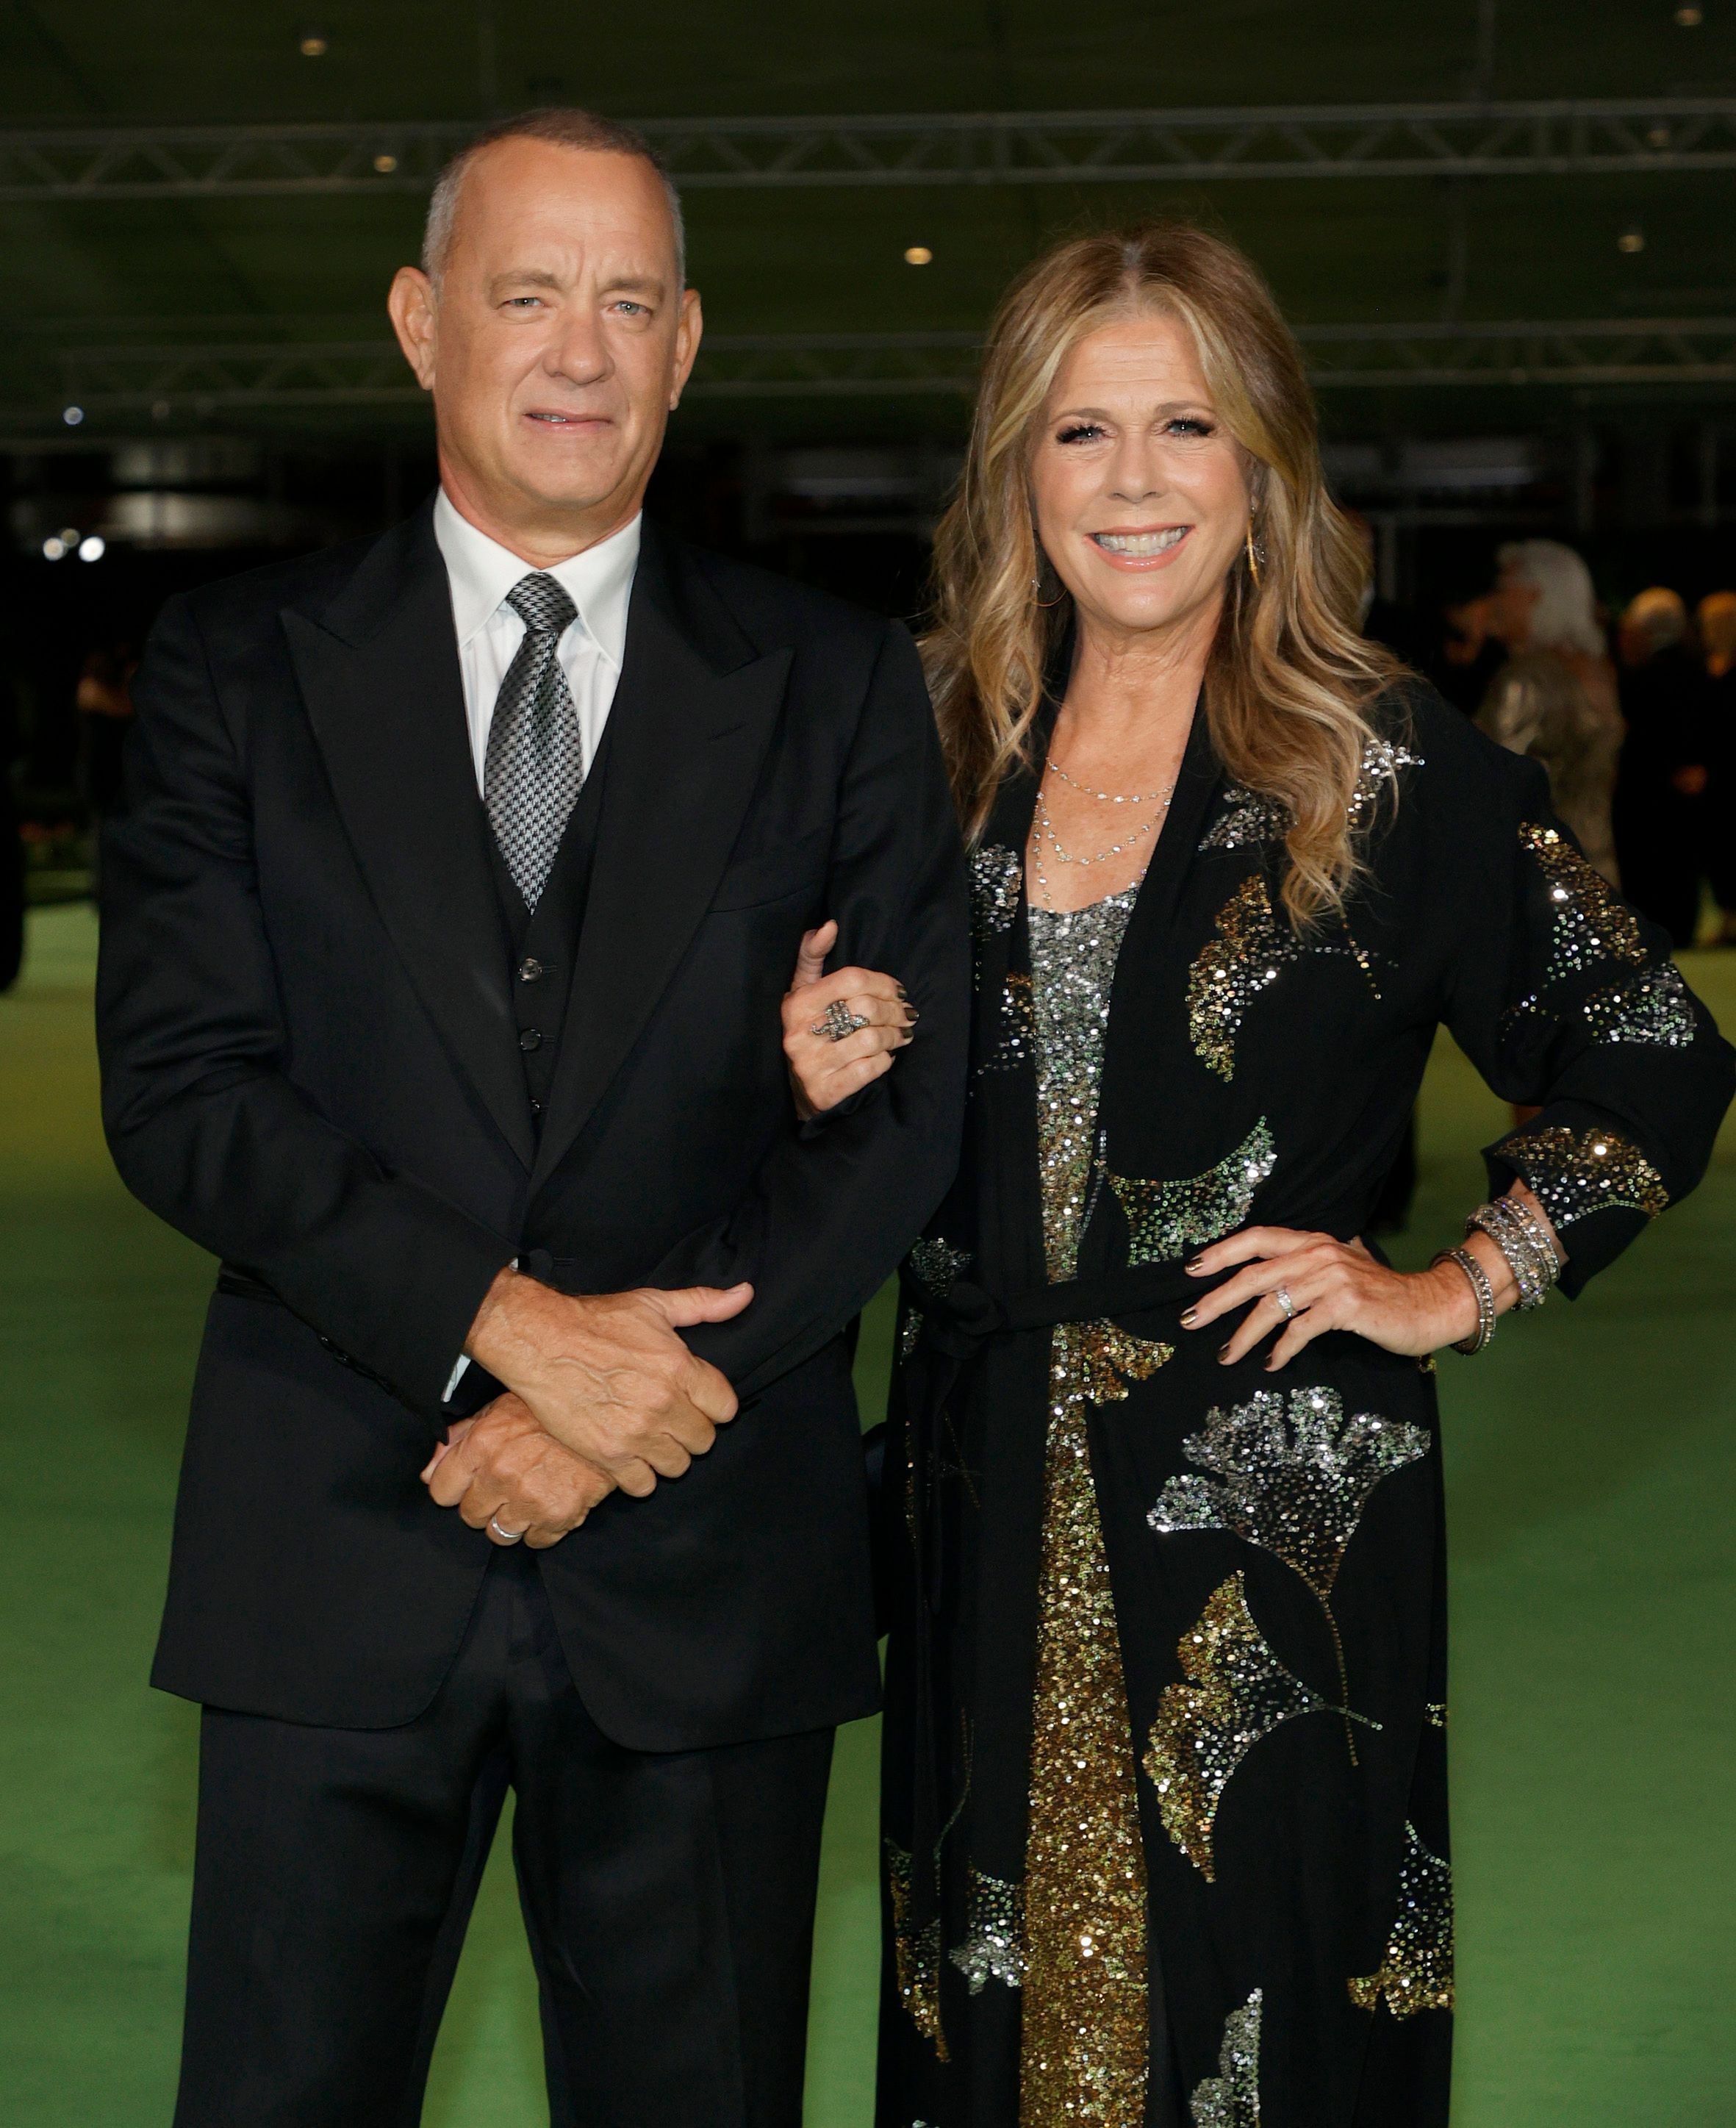 (L-R) Tom Hanks and Rita Wilson at The Academy Museum of Motion Pictures Opening Gala at The Academy Museum of Motion Pictures on September 25, 2021 in Los Angeles, California | Source: Getty Images